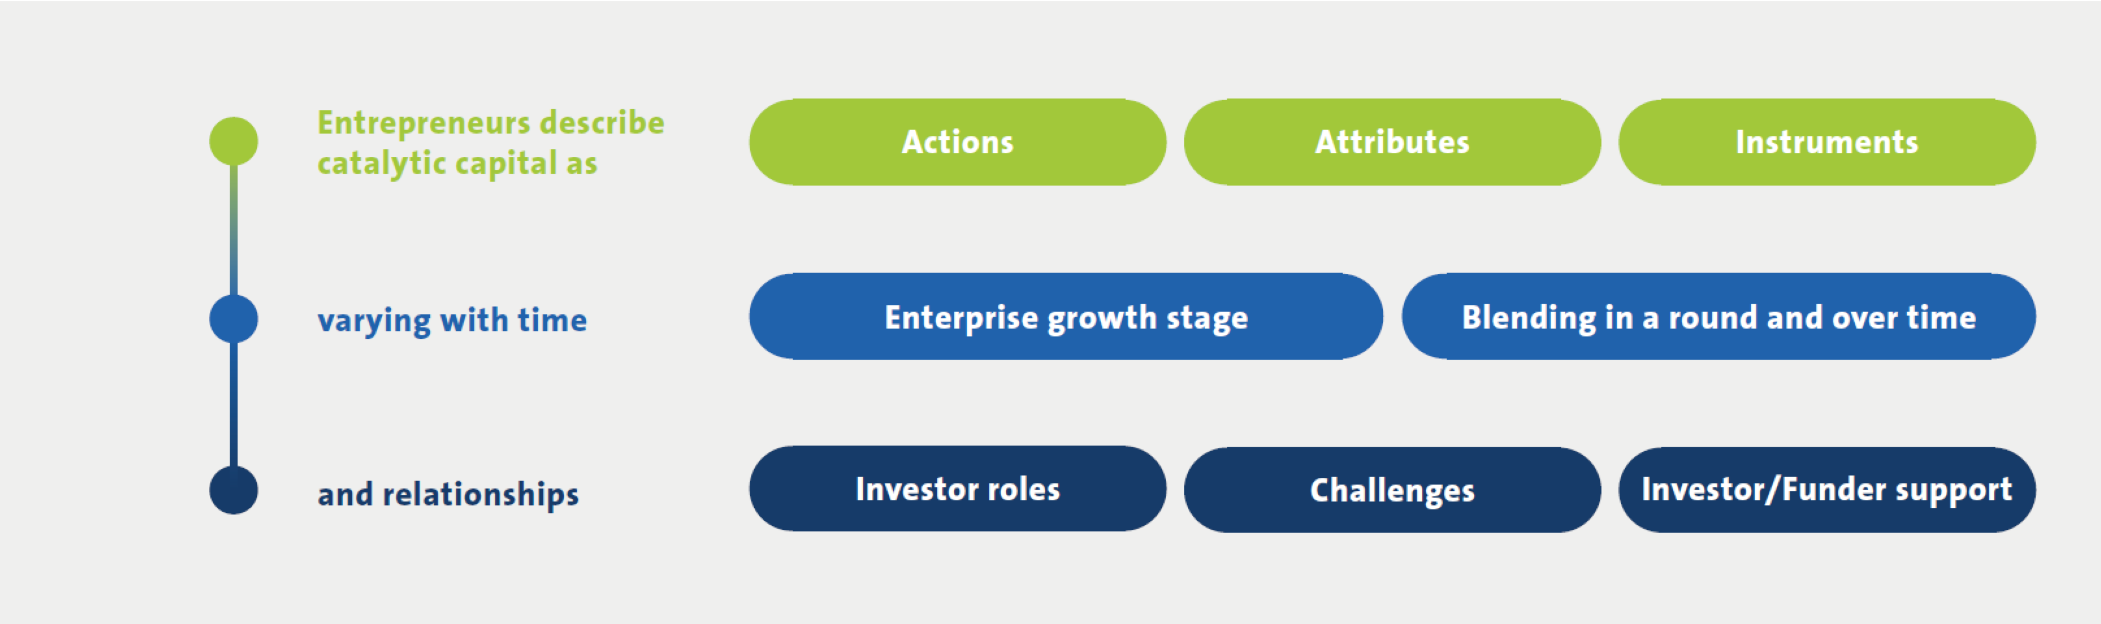 Catalytic capital - what's in it for the entrepreneur 